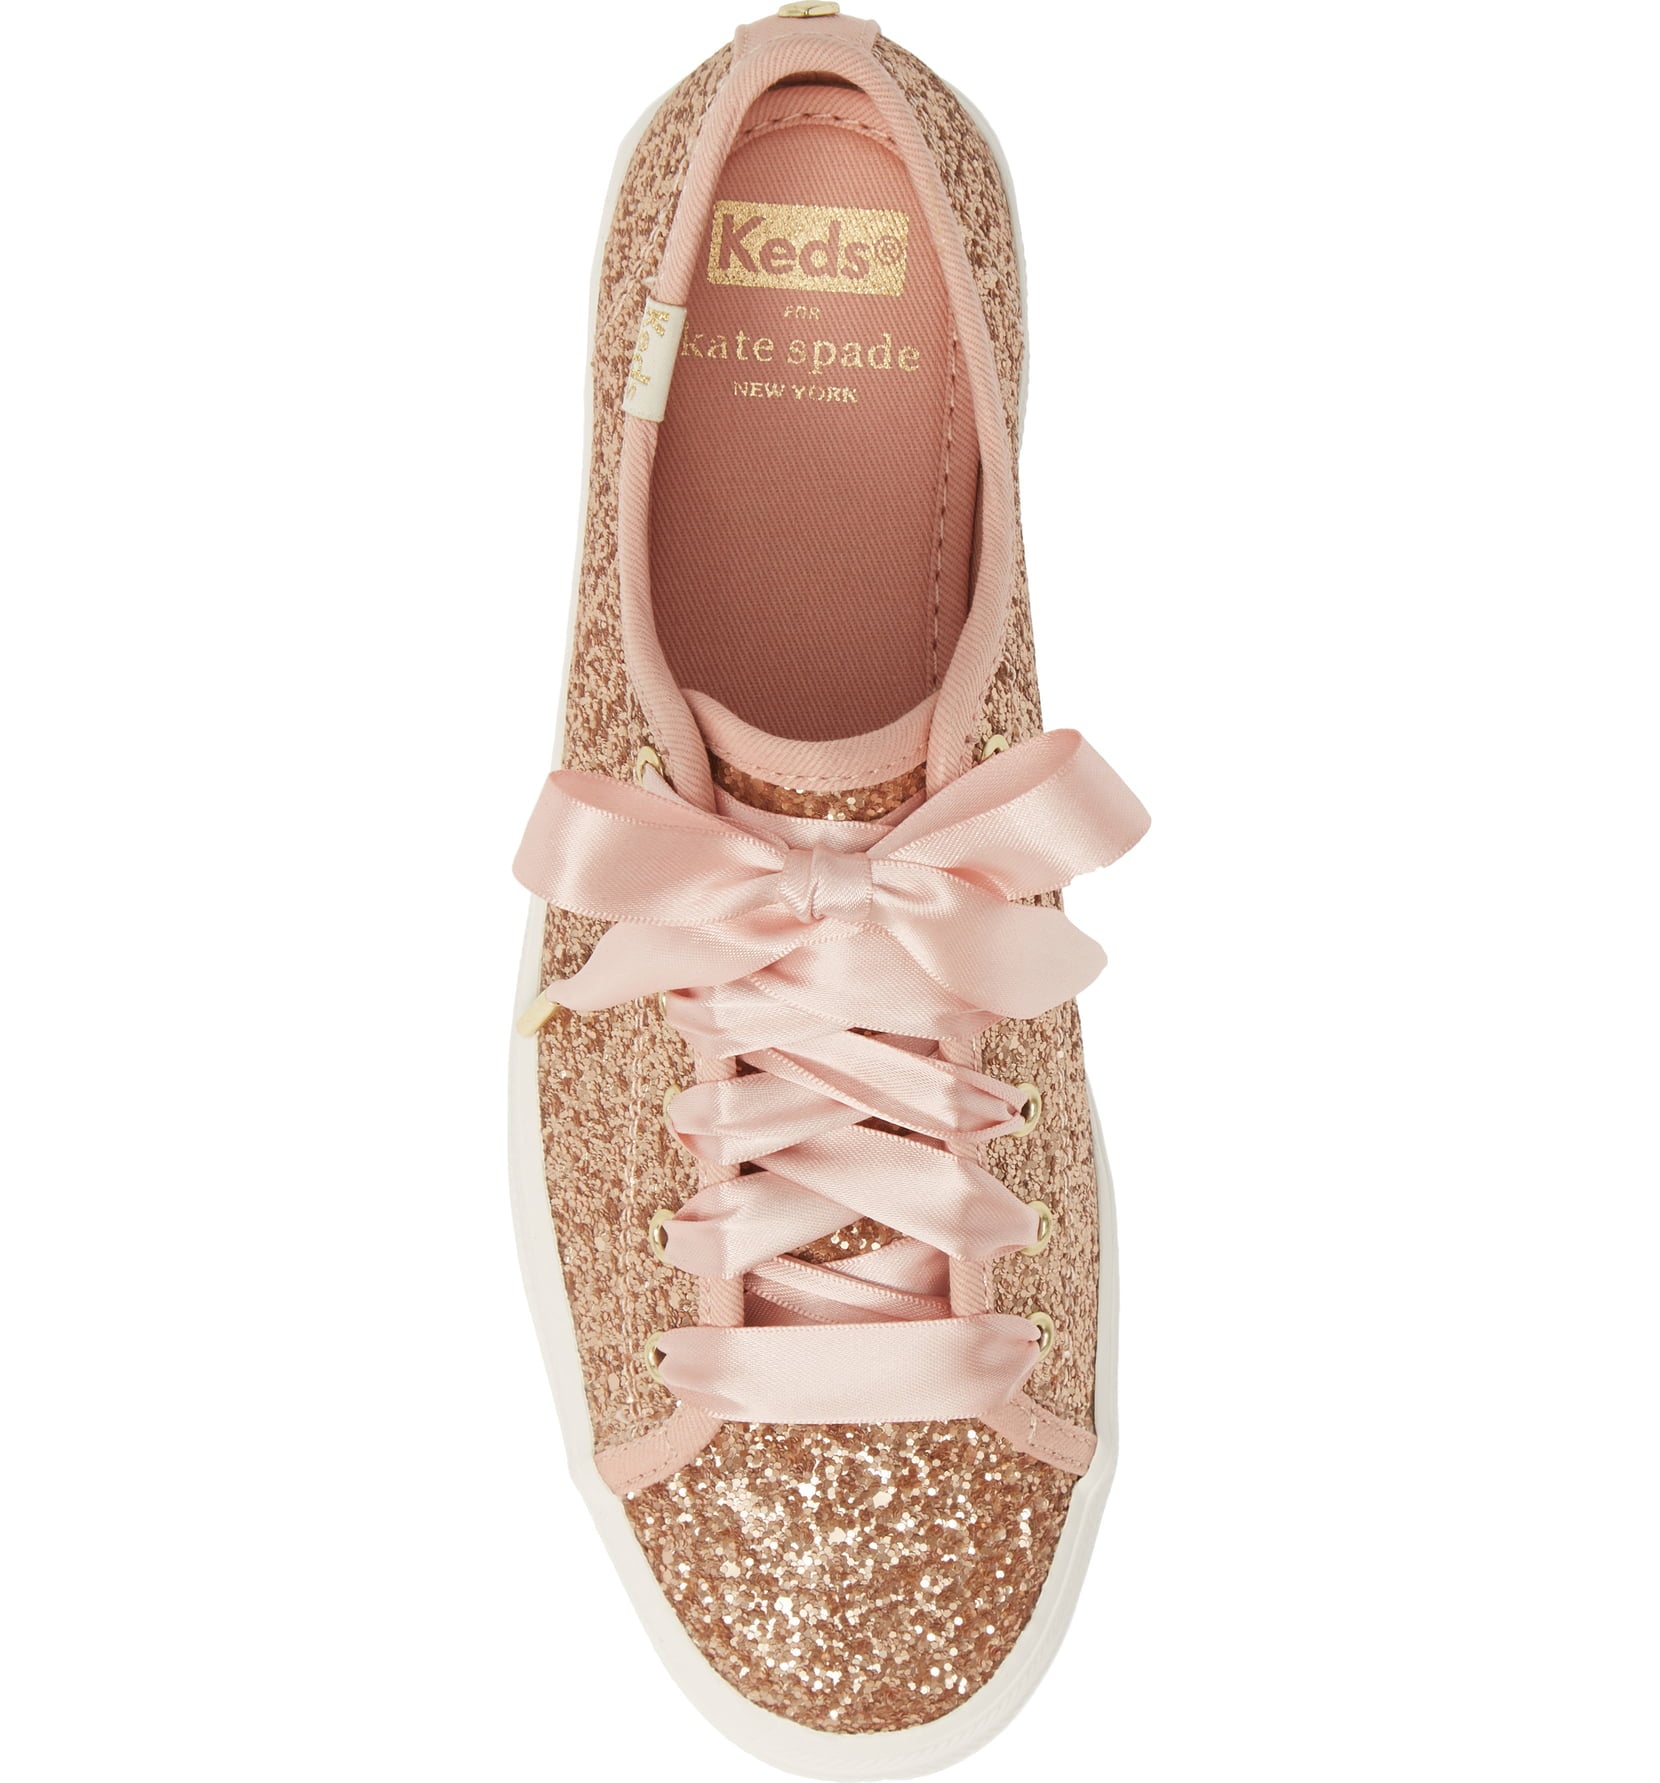 Keds x Kate Spade New York Triple Kick Glitter Sneakers | Kate Spade NY x  Keds Released Rose Gold Sneakers, and We're in a Glitter-Induced Craze |  POPSUGAR Fashion Photo 4